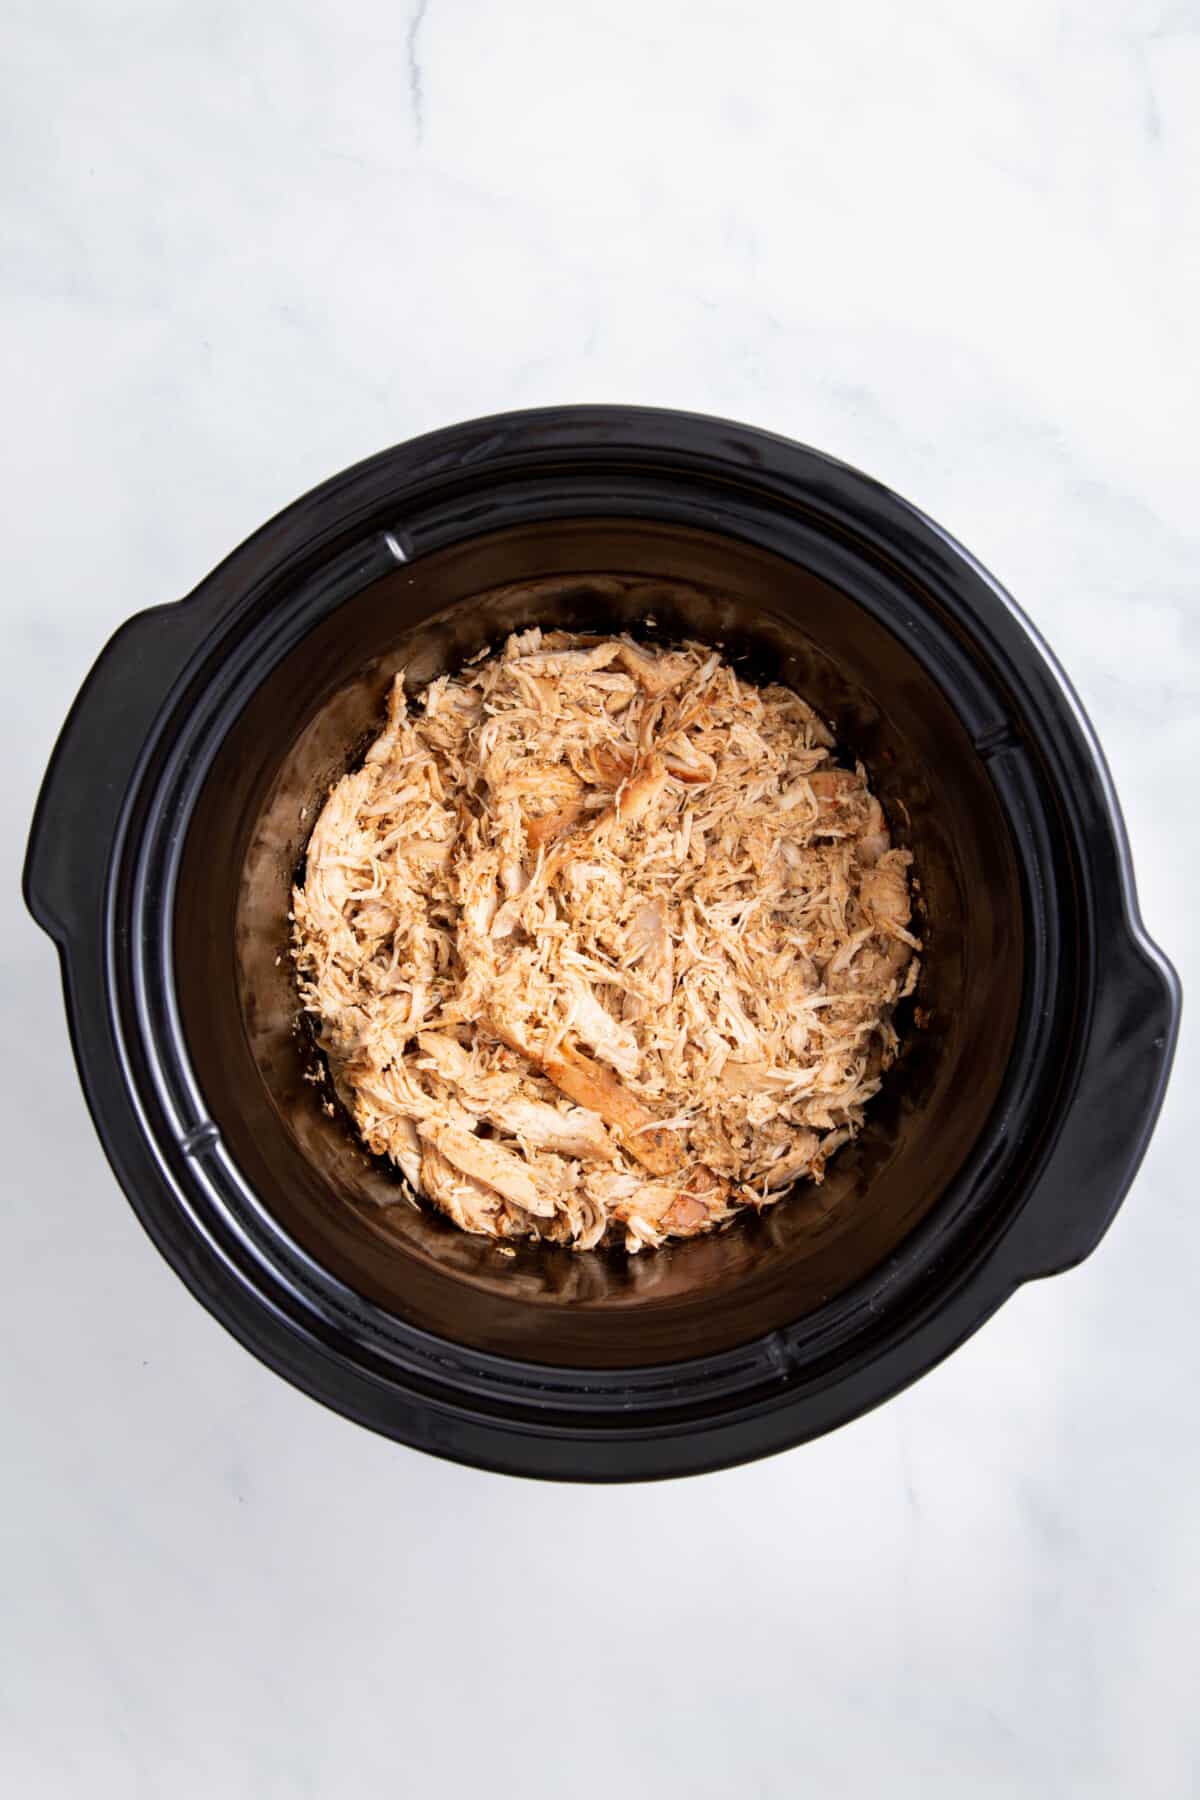 cooked shredded chicken in a slow cooker.